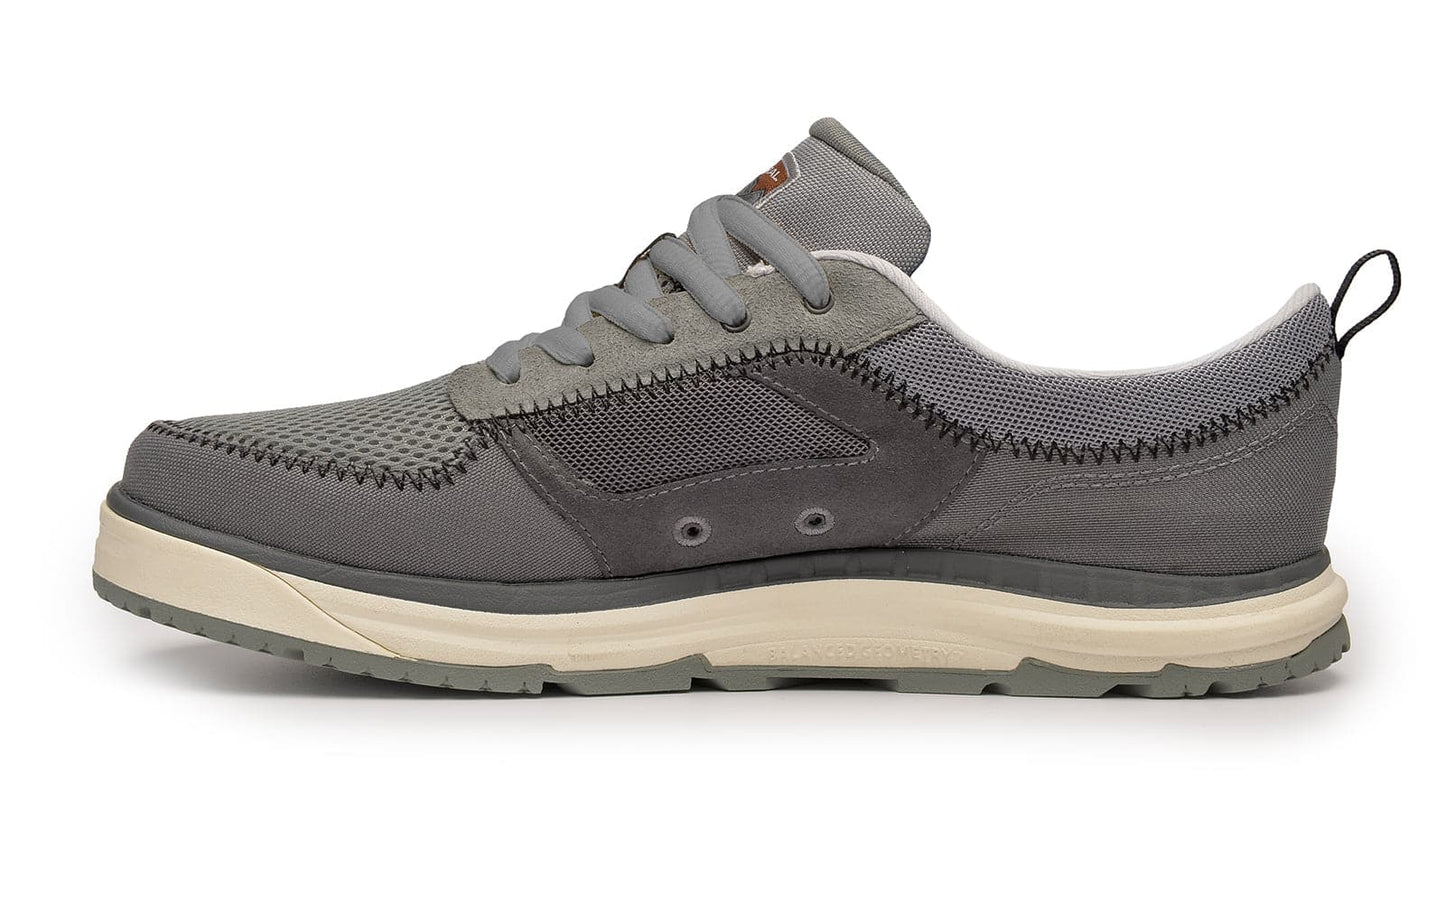 Featuring the Brewer 2.0 - Men's men's footwear, watersports manufactured by Astral shown here from a fourteenth angle.